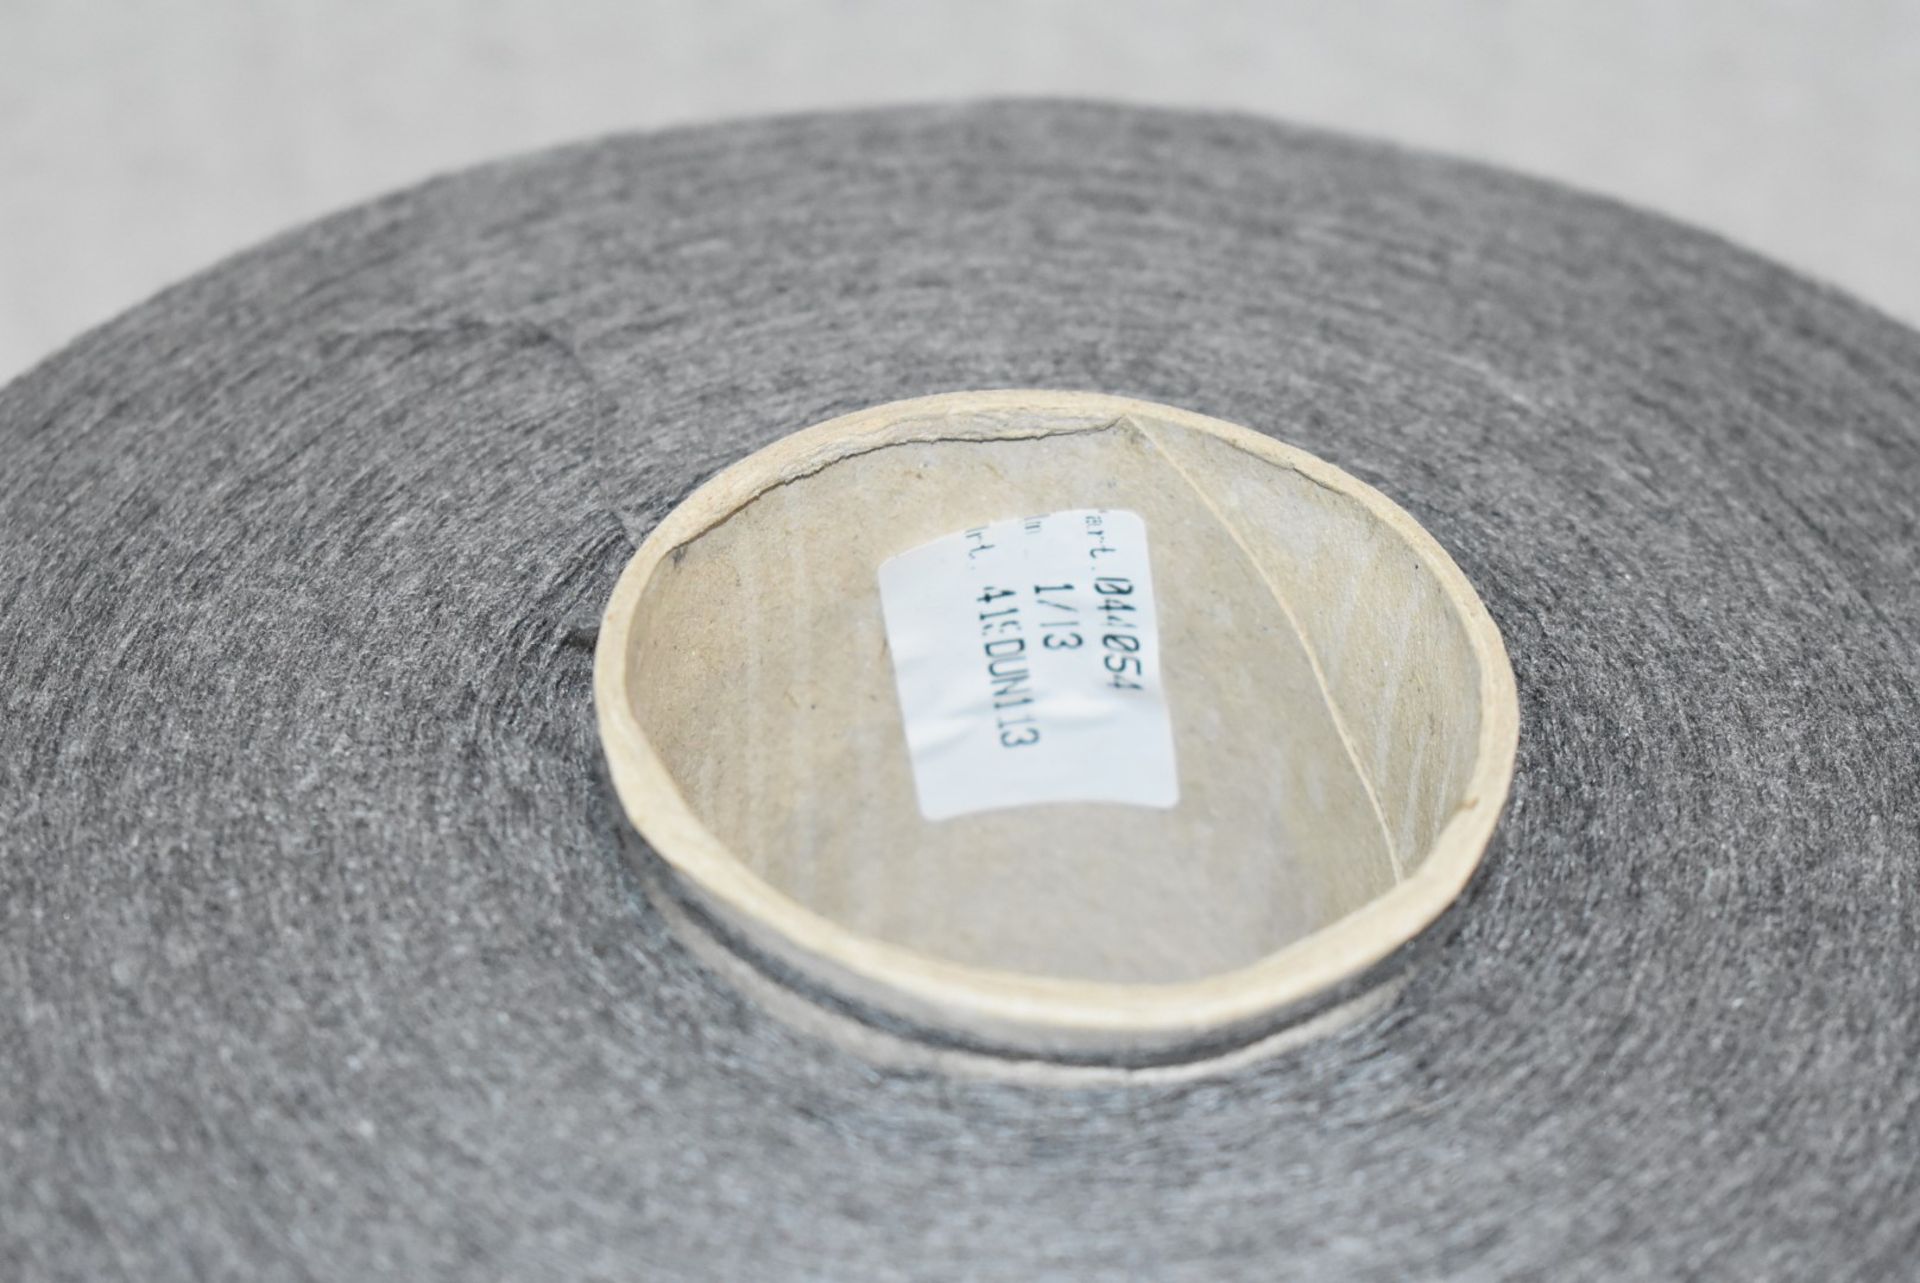 1 x Cone of 1/13 MicroCotton Knitting Yarn - Mid Grey - Approx Weight: 2,500g - New Stock ABL Yarn - Image 16 of 18